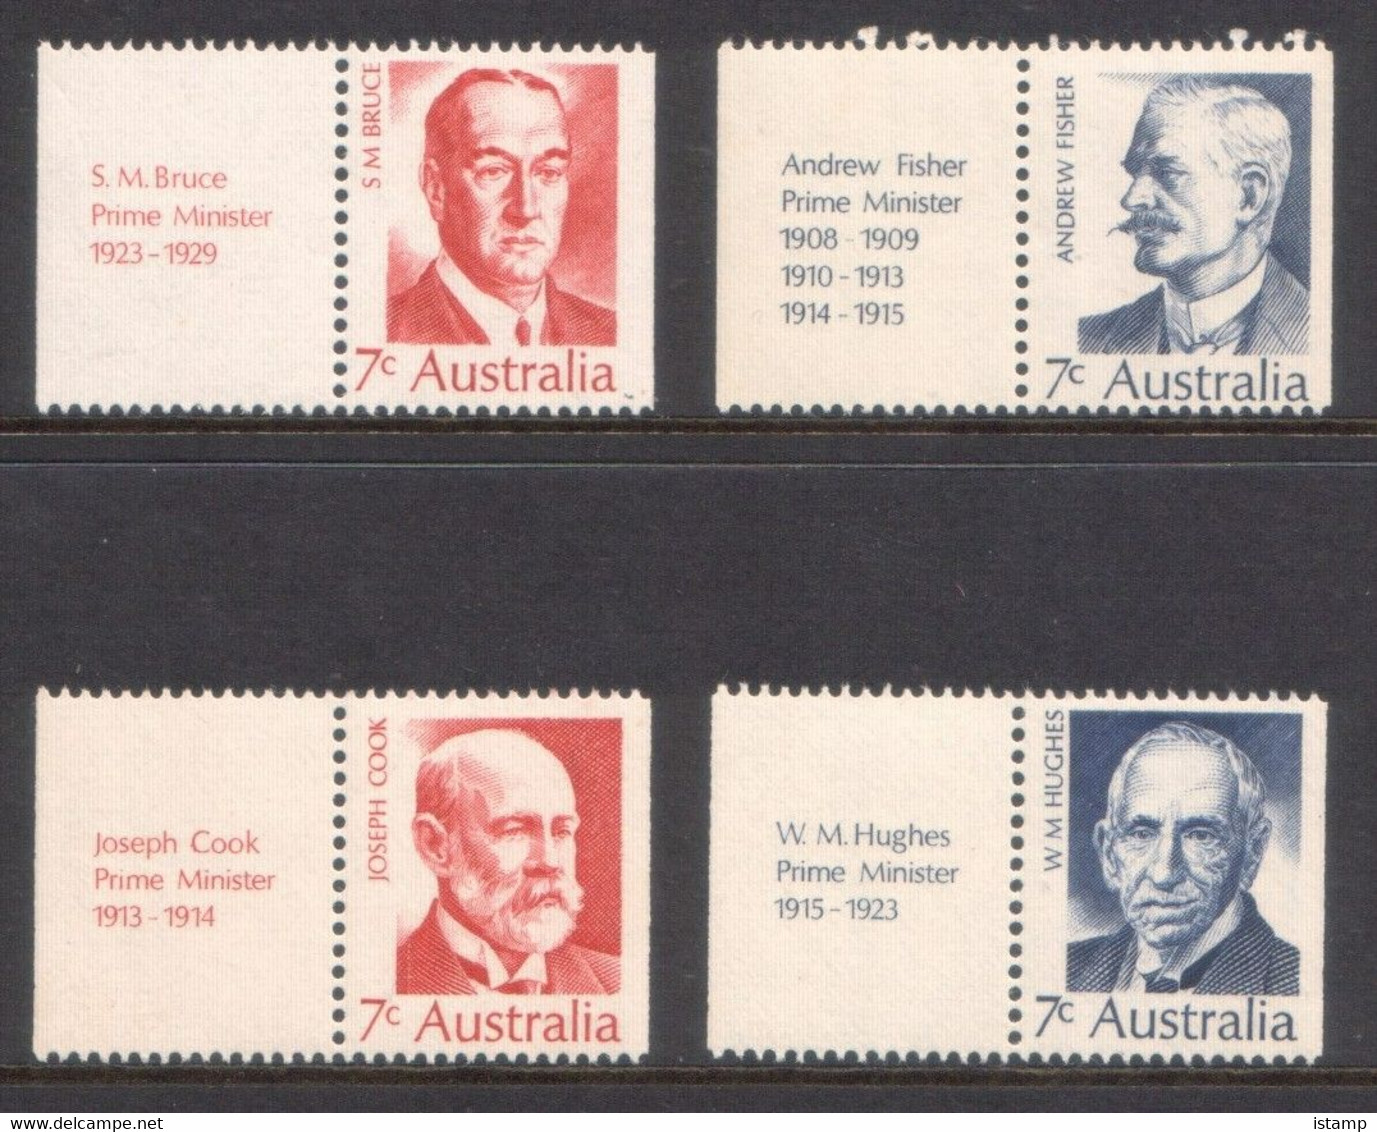 ⭕1972 - Australia Famous Australians (4th Series) Prime Ministers With Tabs - Set 4 Stamps MNH⭕ - Mint Stamps